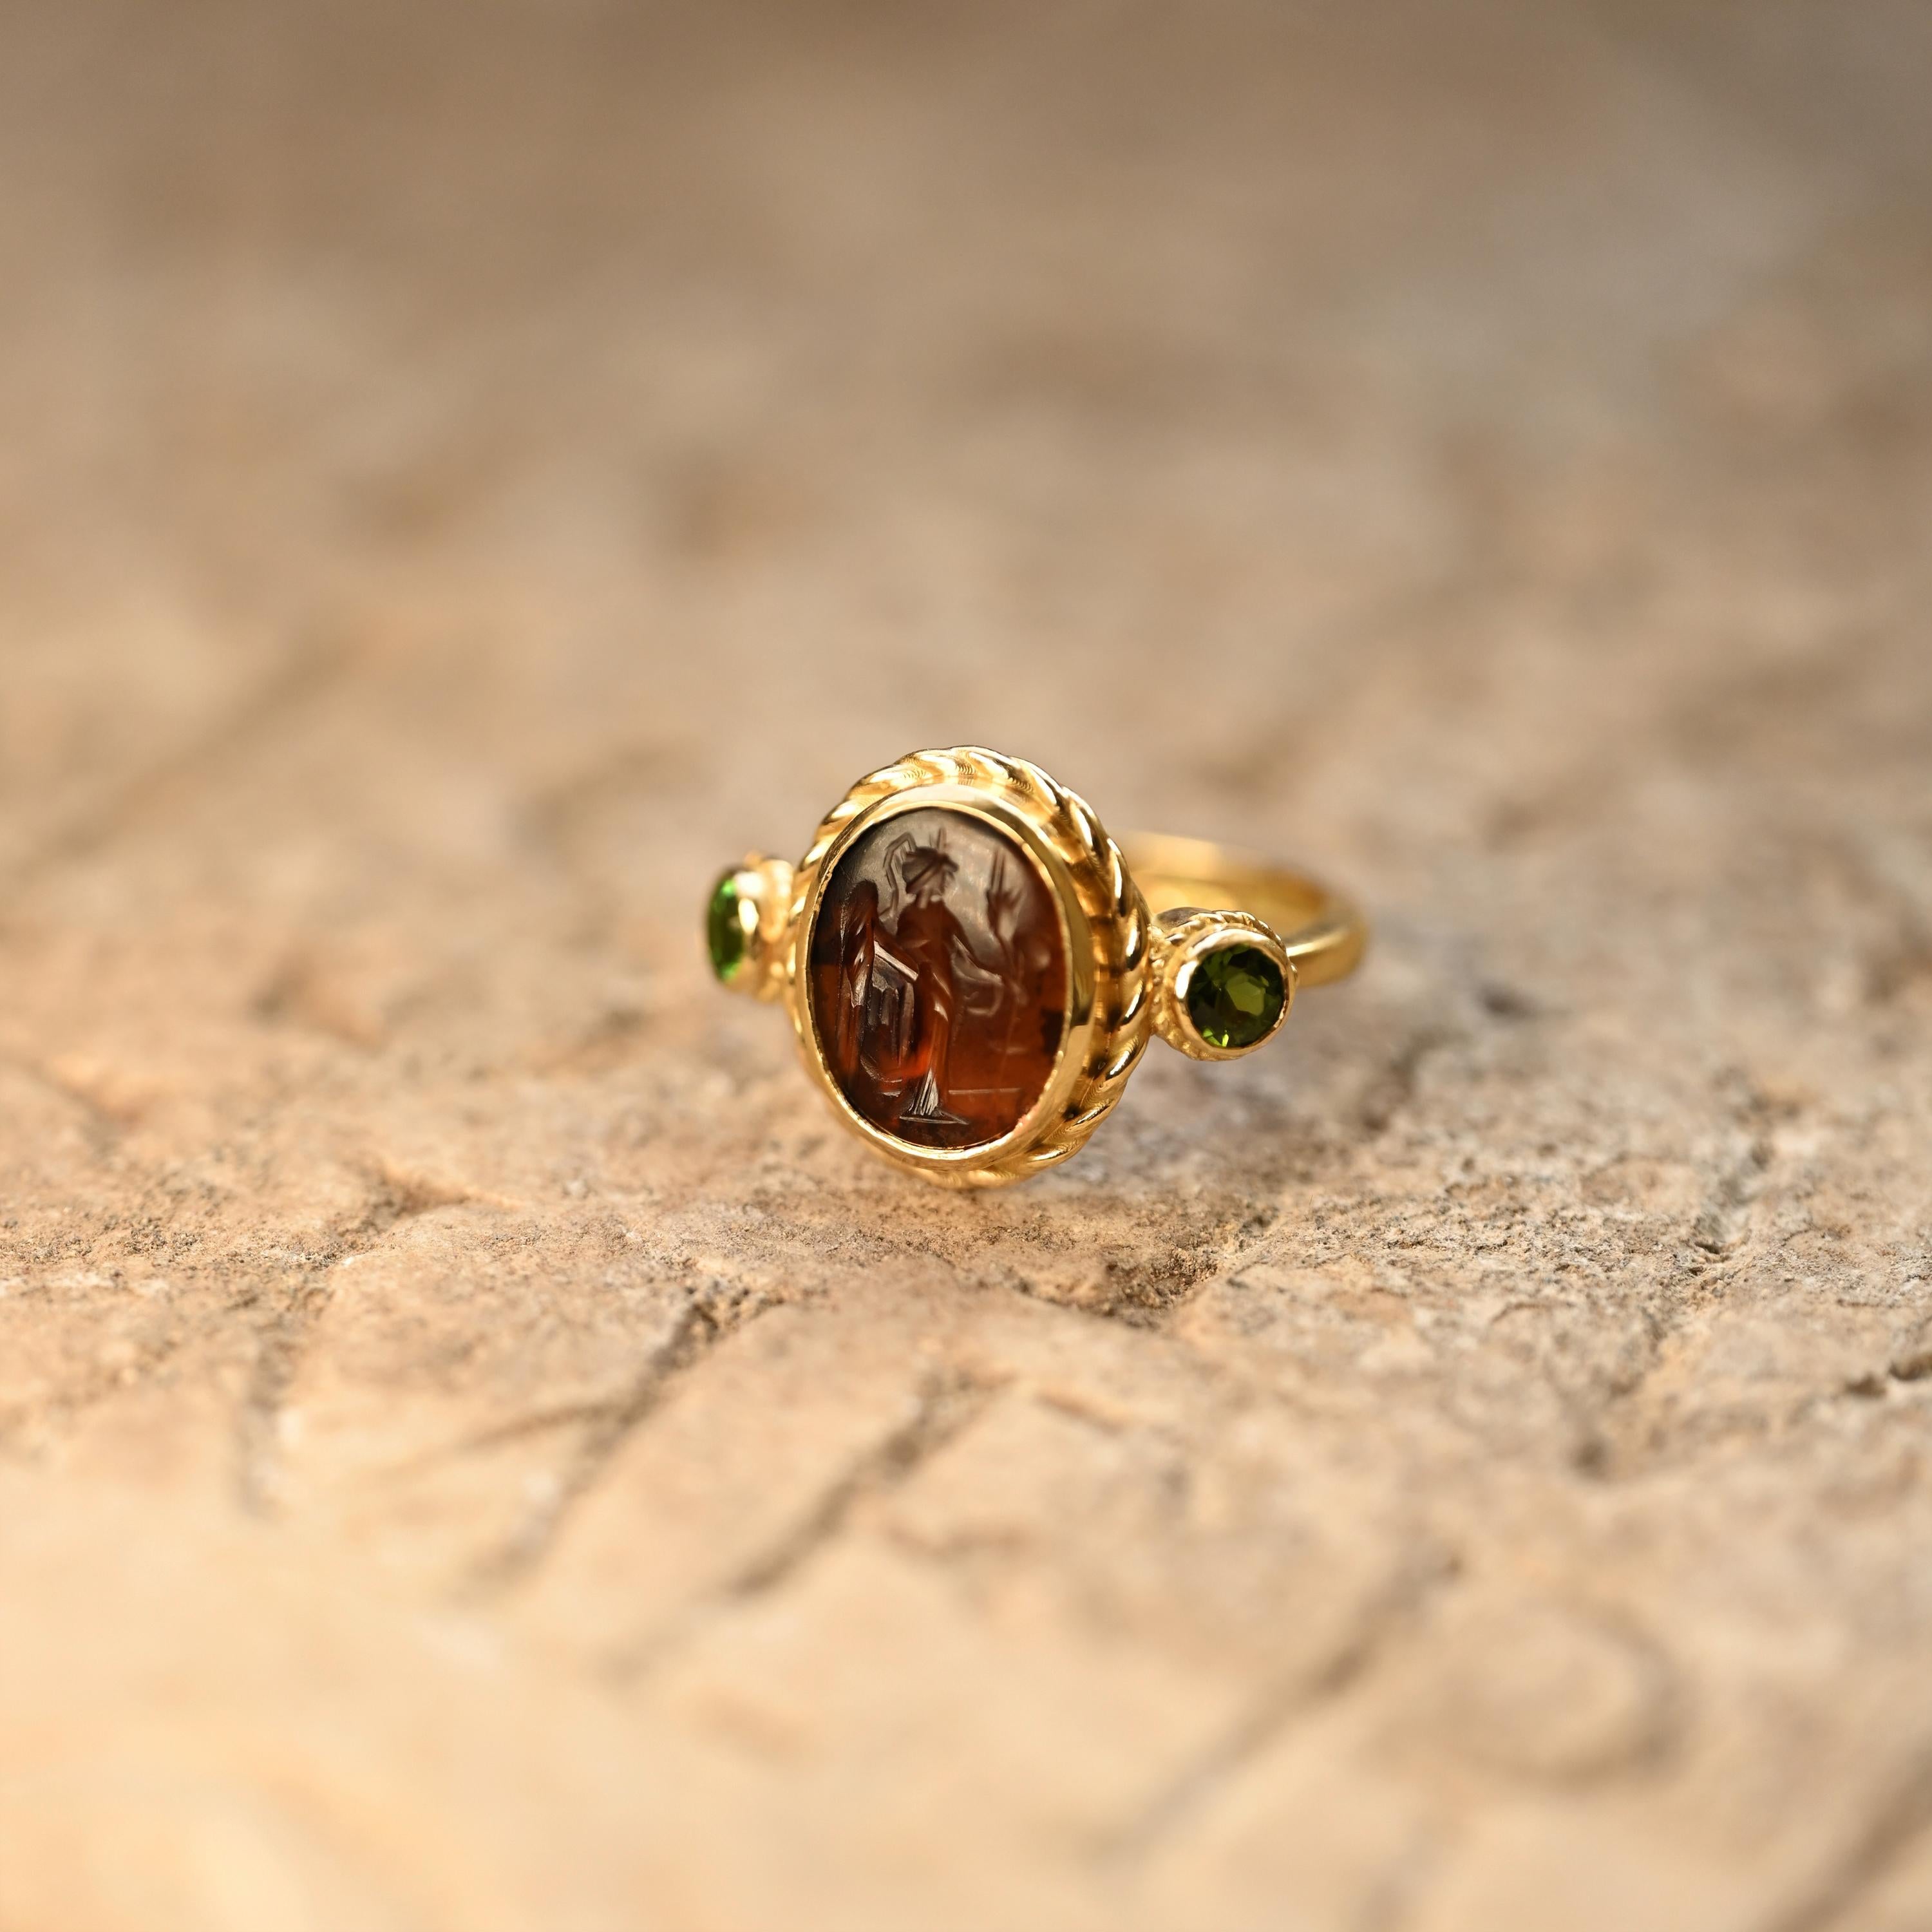 This 18Kt gold ring showcases an authentic Roman carnelian, tracing its origins to the 1st-2nd century A.D. Adorned with the image of Demeter, known as Ceres in Roman mythology, this exquisite piece showcases her classical attributes: ears of wheat,